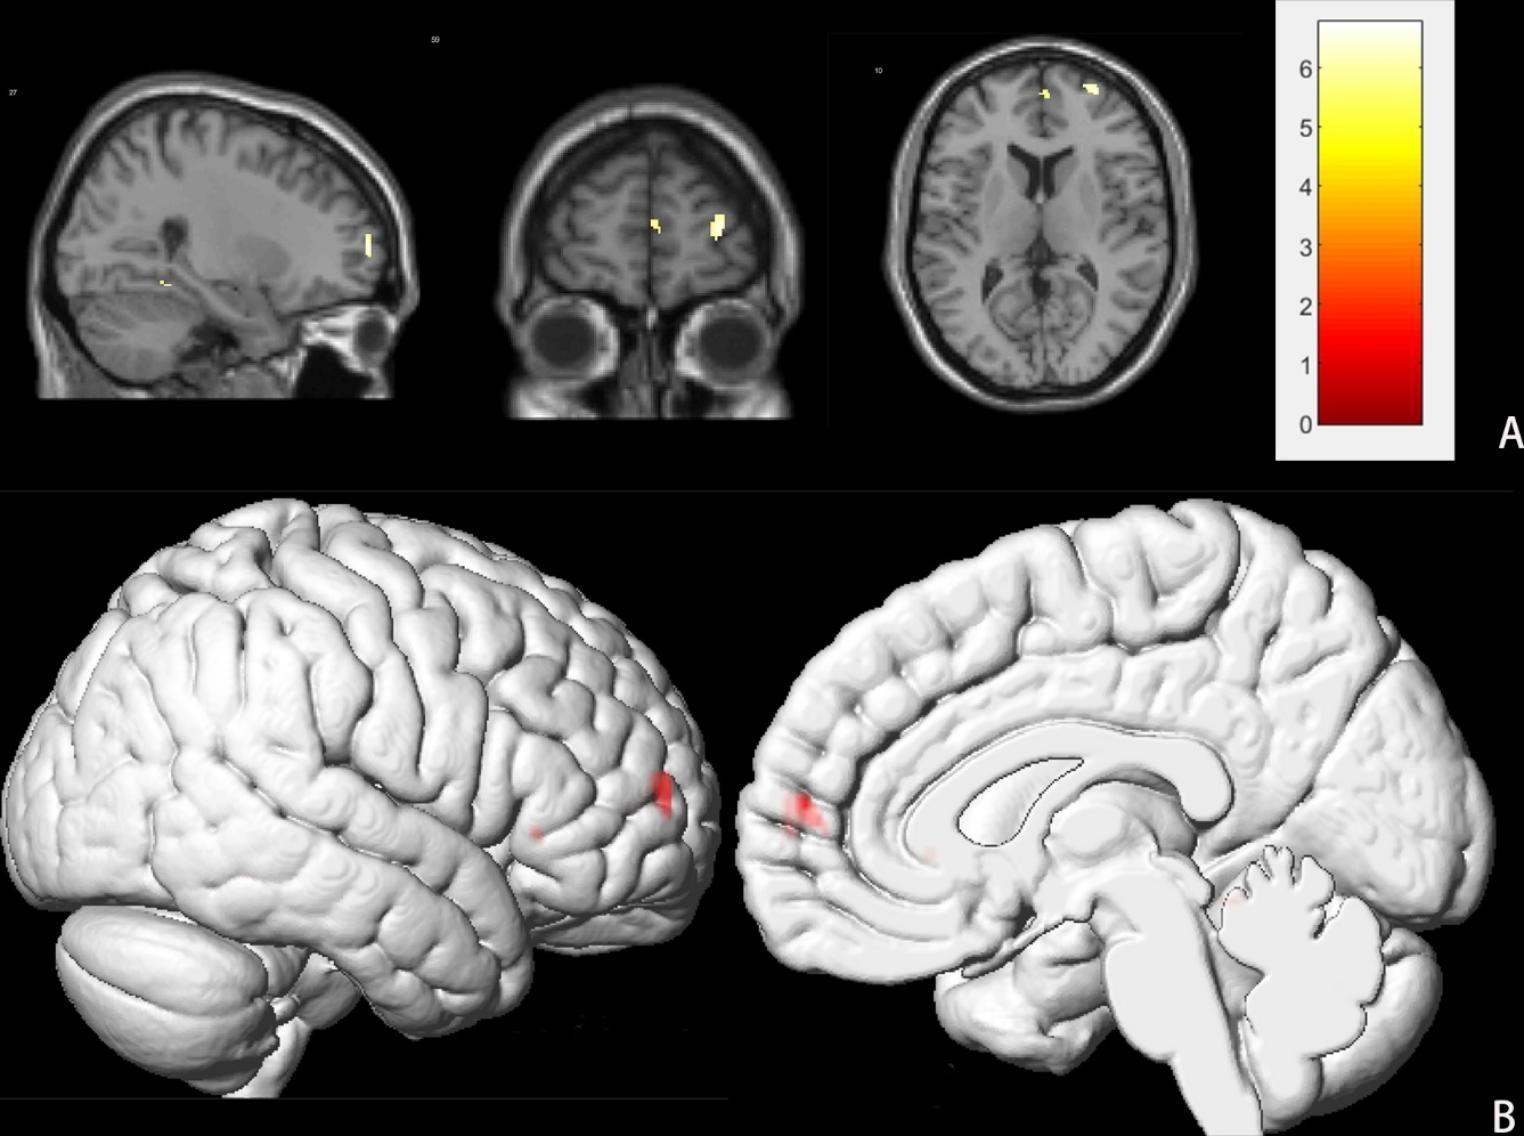 Structural and functional changes following brain surgery in pediatric patients with intracranial space-occupying lesions